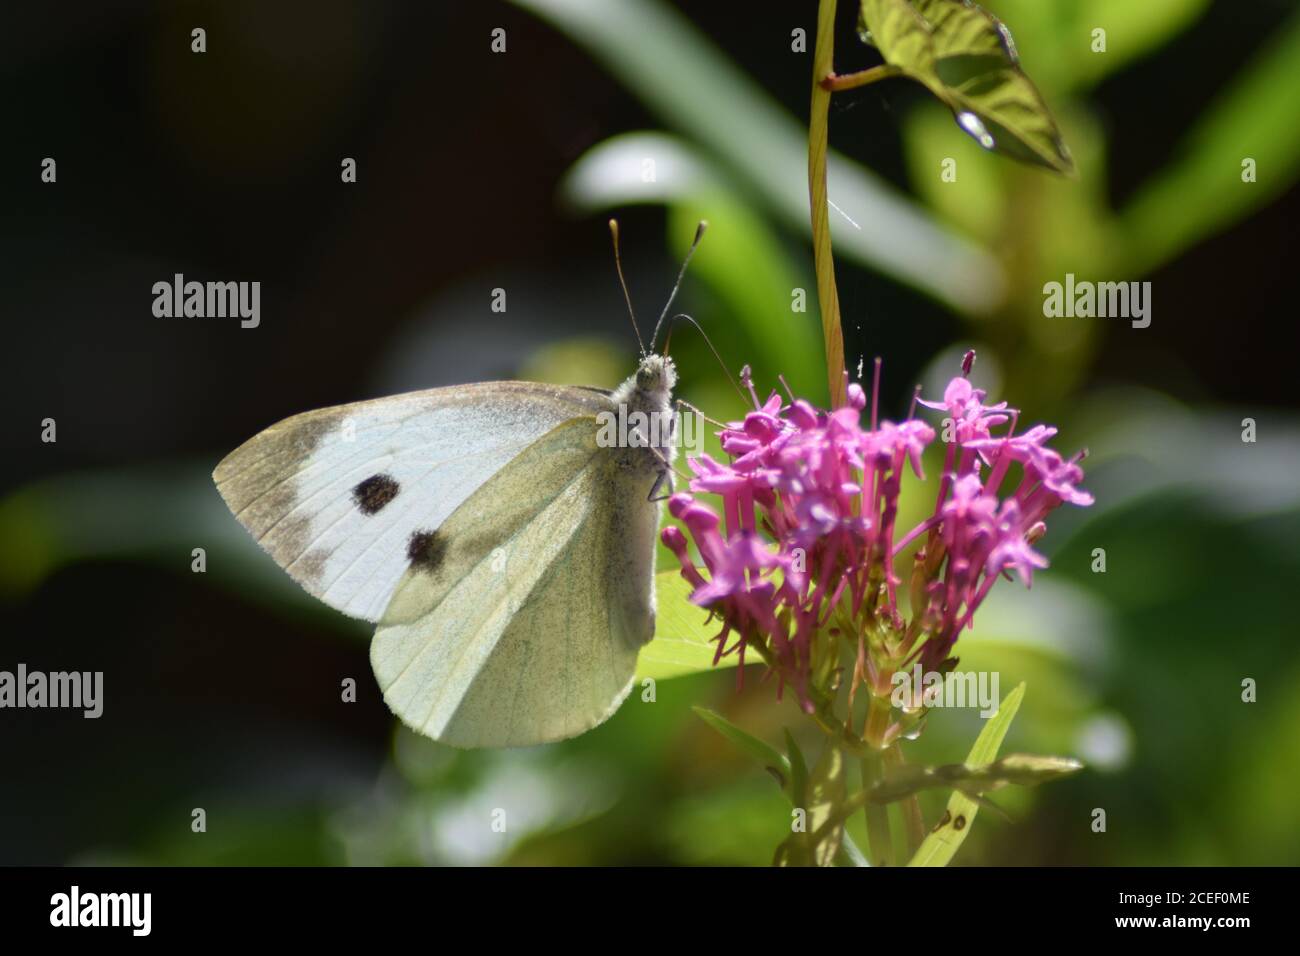 Small White Butterfly on pink flower Stock Photo